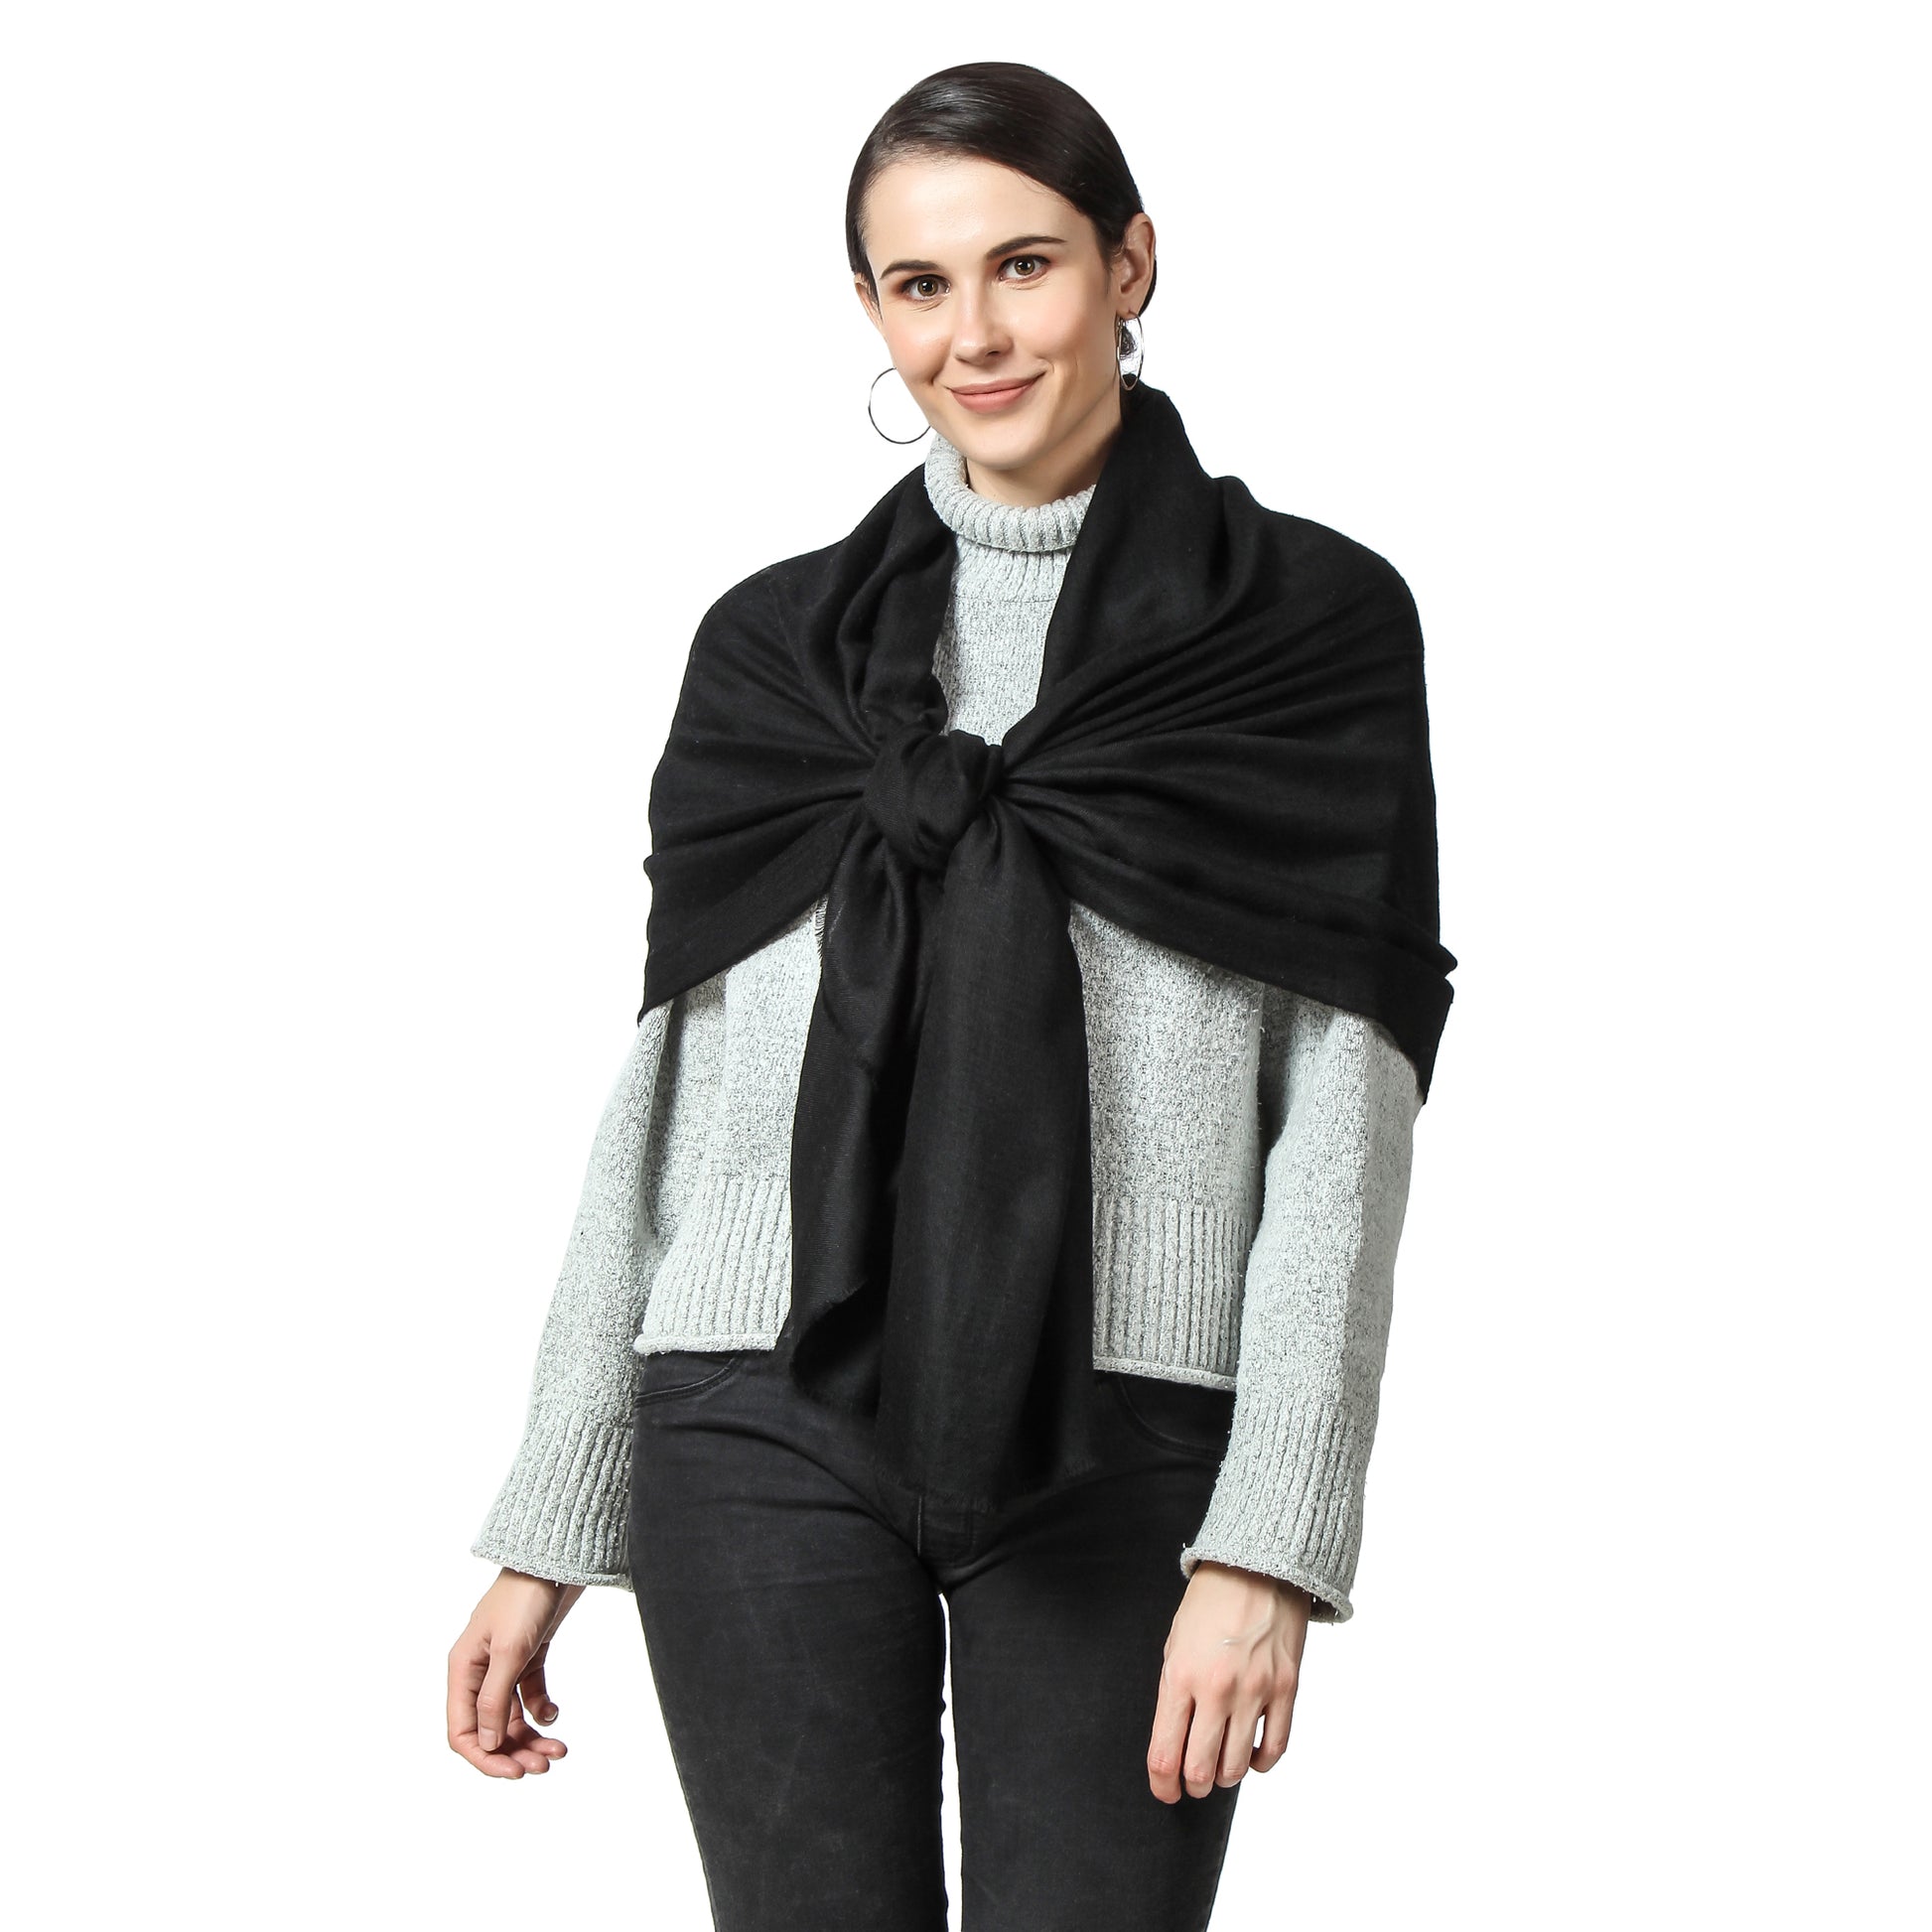 Image of a woman wearing a black cashmere scarf draped over her back and knotted in front. The knot is positioned slightly off-center and adds a stylish touch to the woman's outfit. The scarf is soft and luxurious-looking, and the black color adds to its classic and versatile style. The woman's expression is confident and composed, with a subtle smile on her face.